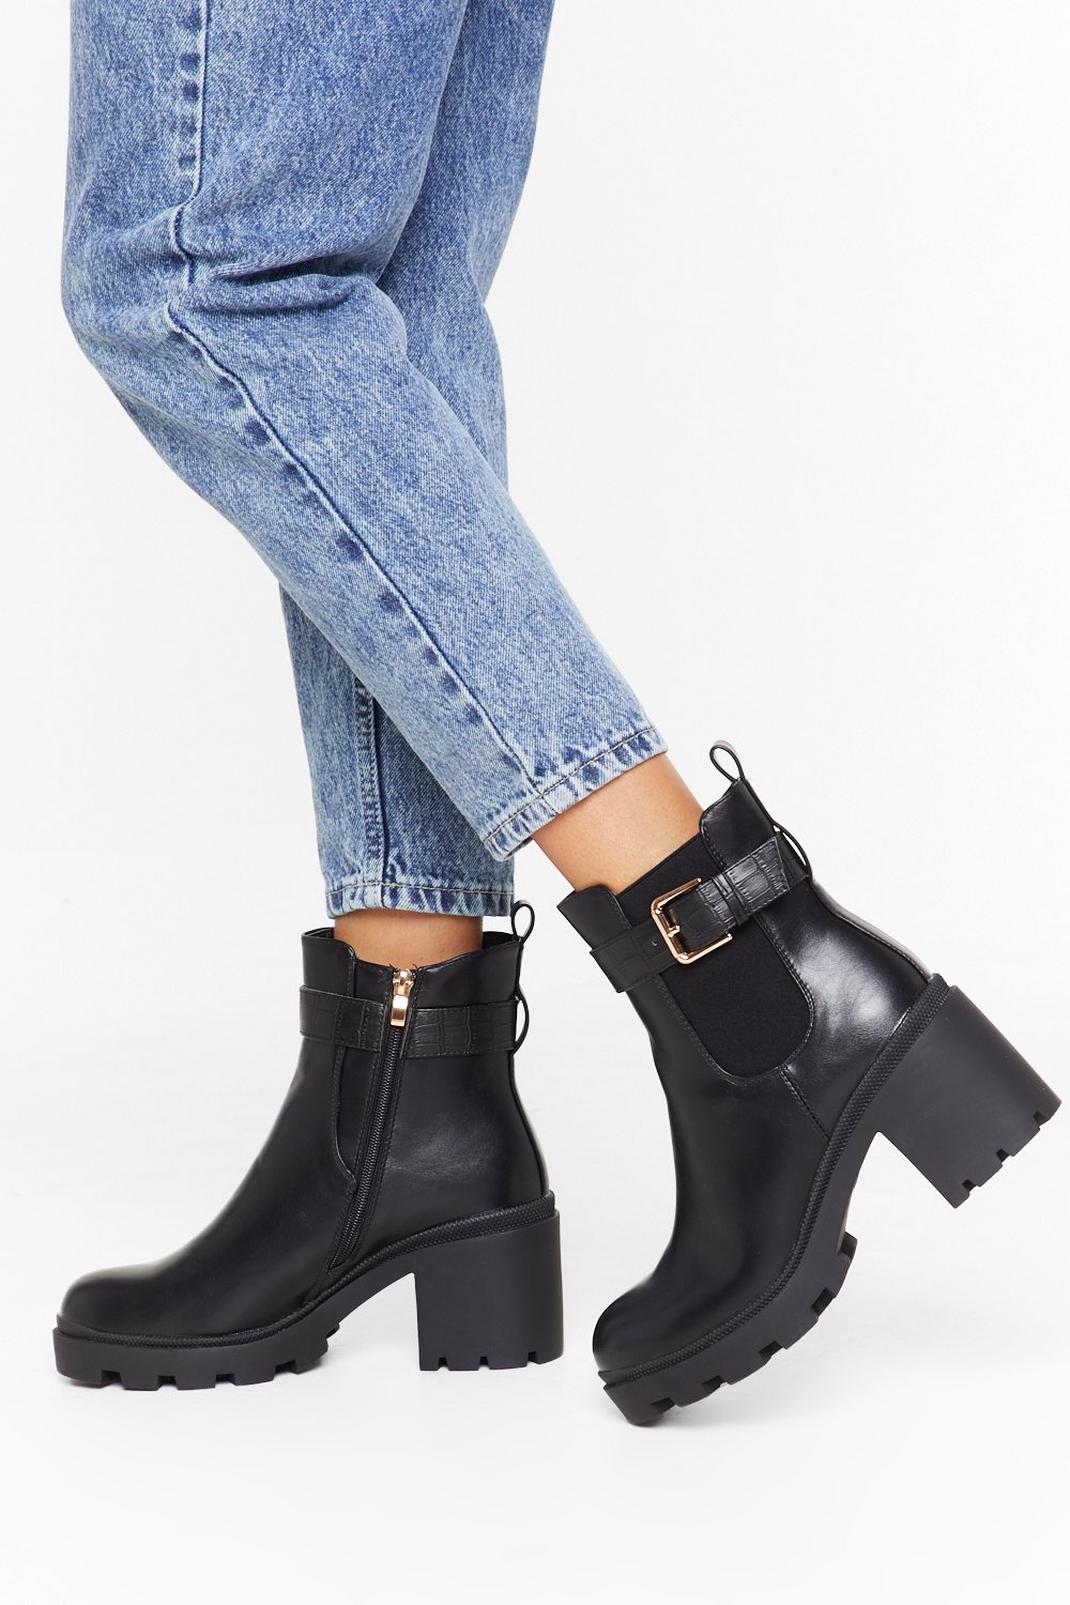 Gimme All the Gloss Patent Faux Leather Boots image number 1